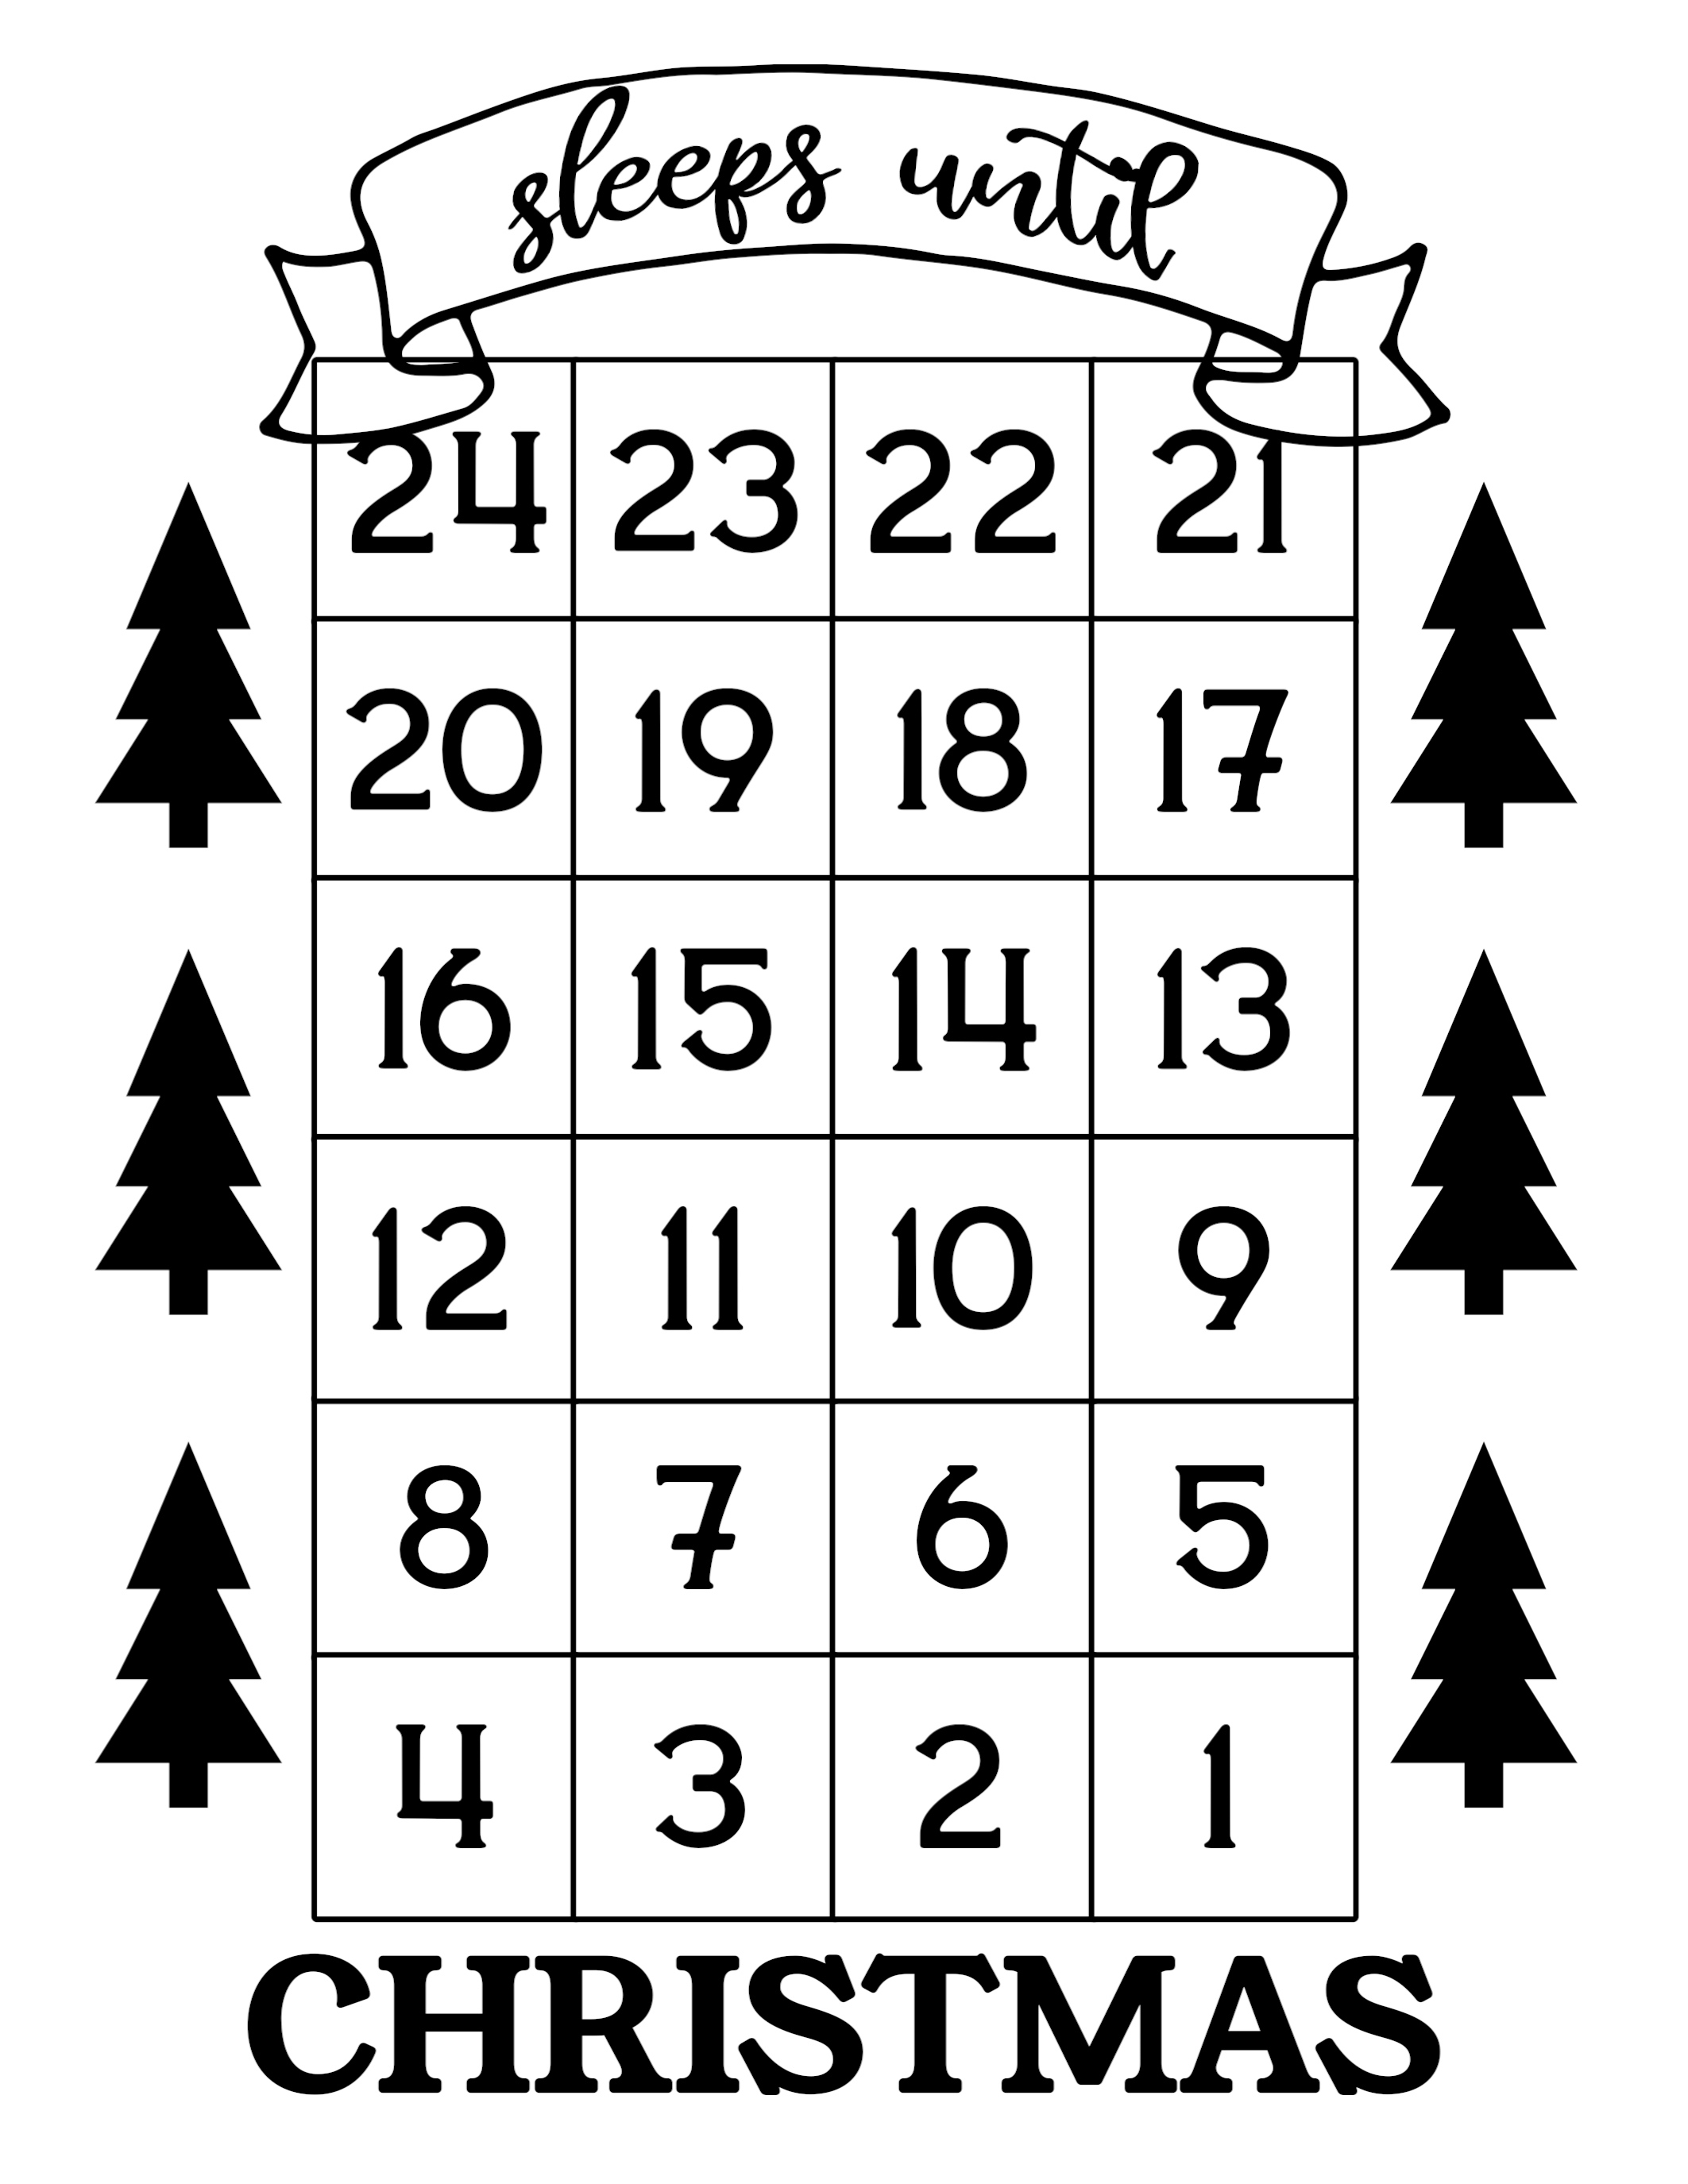 How Many Days Until Christmas Free Printable - Paper Trail Dashing Countdown Claende To Print Off